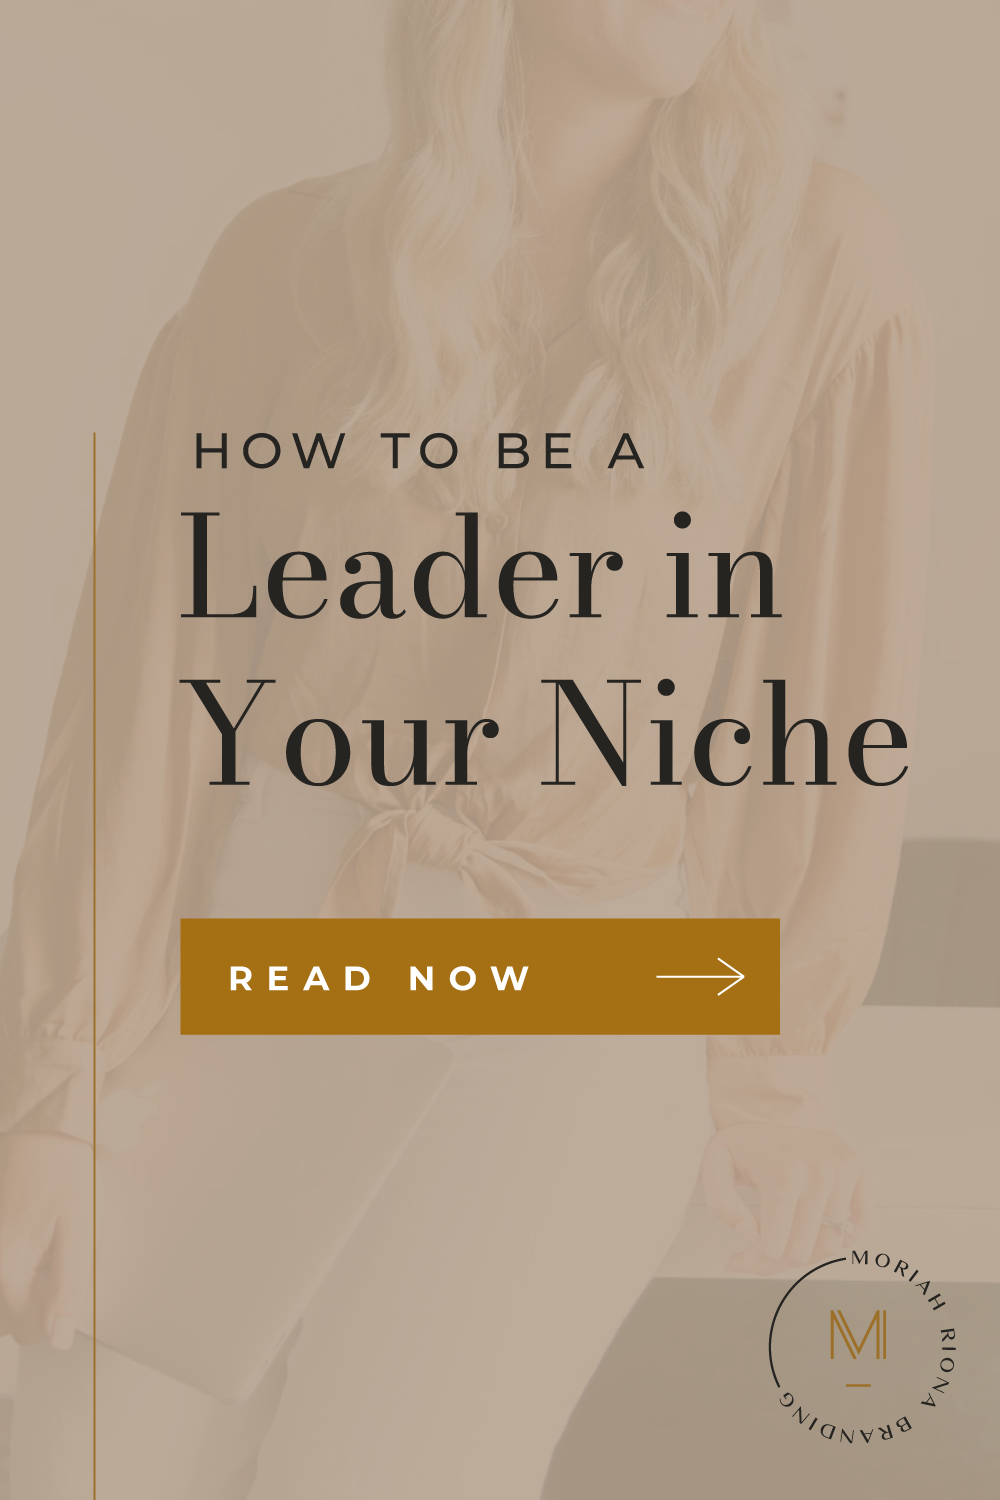 How to be a leader, how to be a leader in your niche, niche authority, expert authority, industry leader, thought leader, how to become a leader, how to become a thought leader, entrepreneurship, online business, business growth strategy, growing your authority, tips for entrepreneurs, tips for life coaches, coaching business, how to start a coaching business, build your authority, how to determine your niche, niche branding, coaching niche, how to choose your niche, branding, Moriah Riona